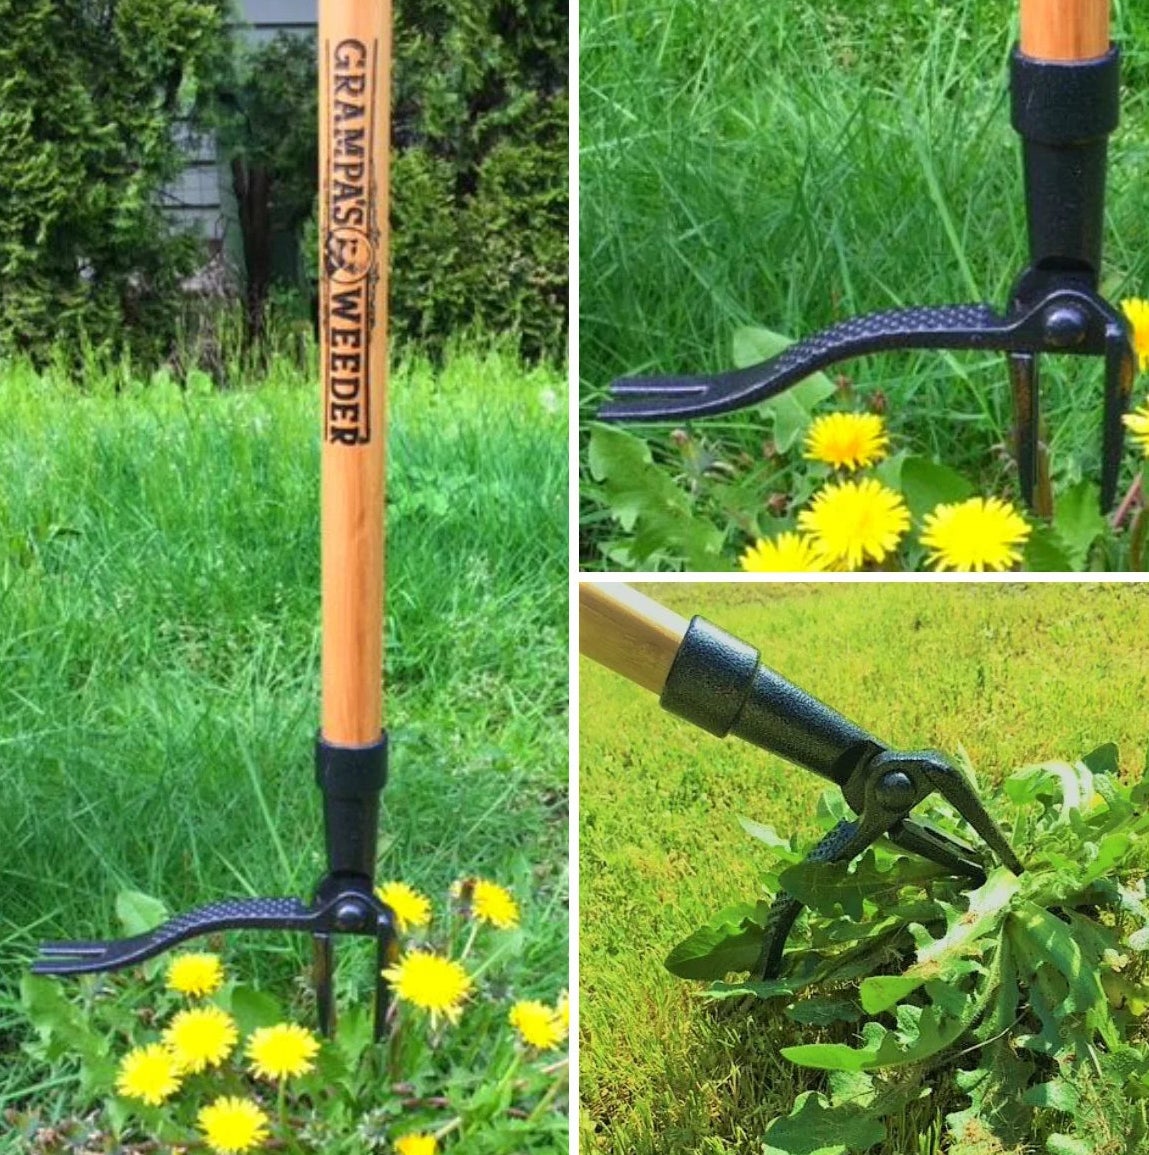 The weed puller with a bamboo long handle and a steel four-claw design